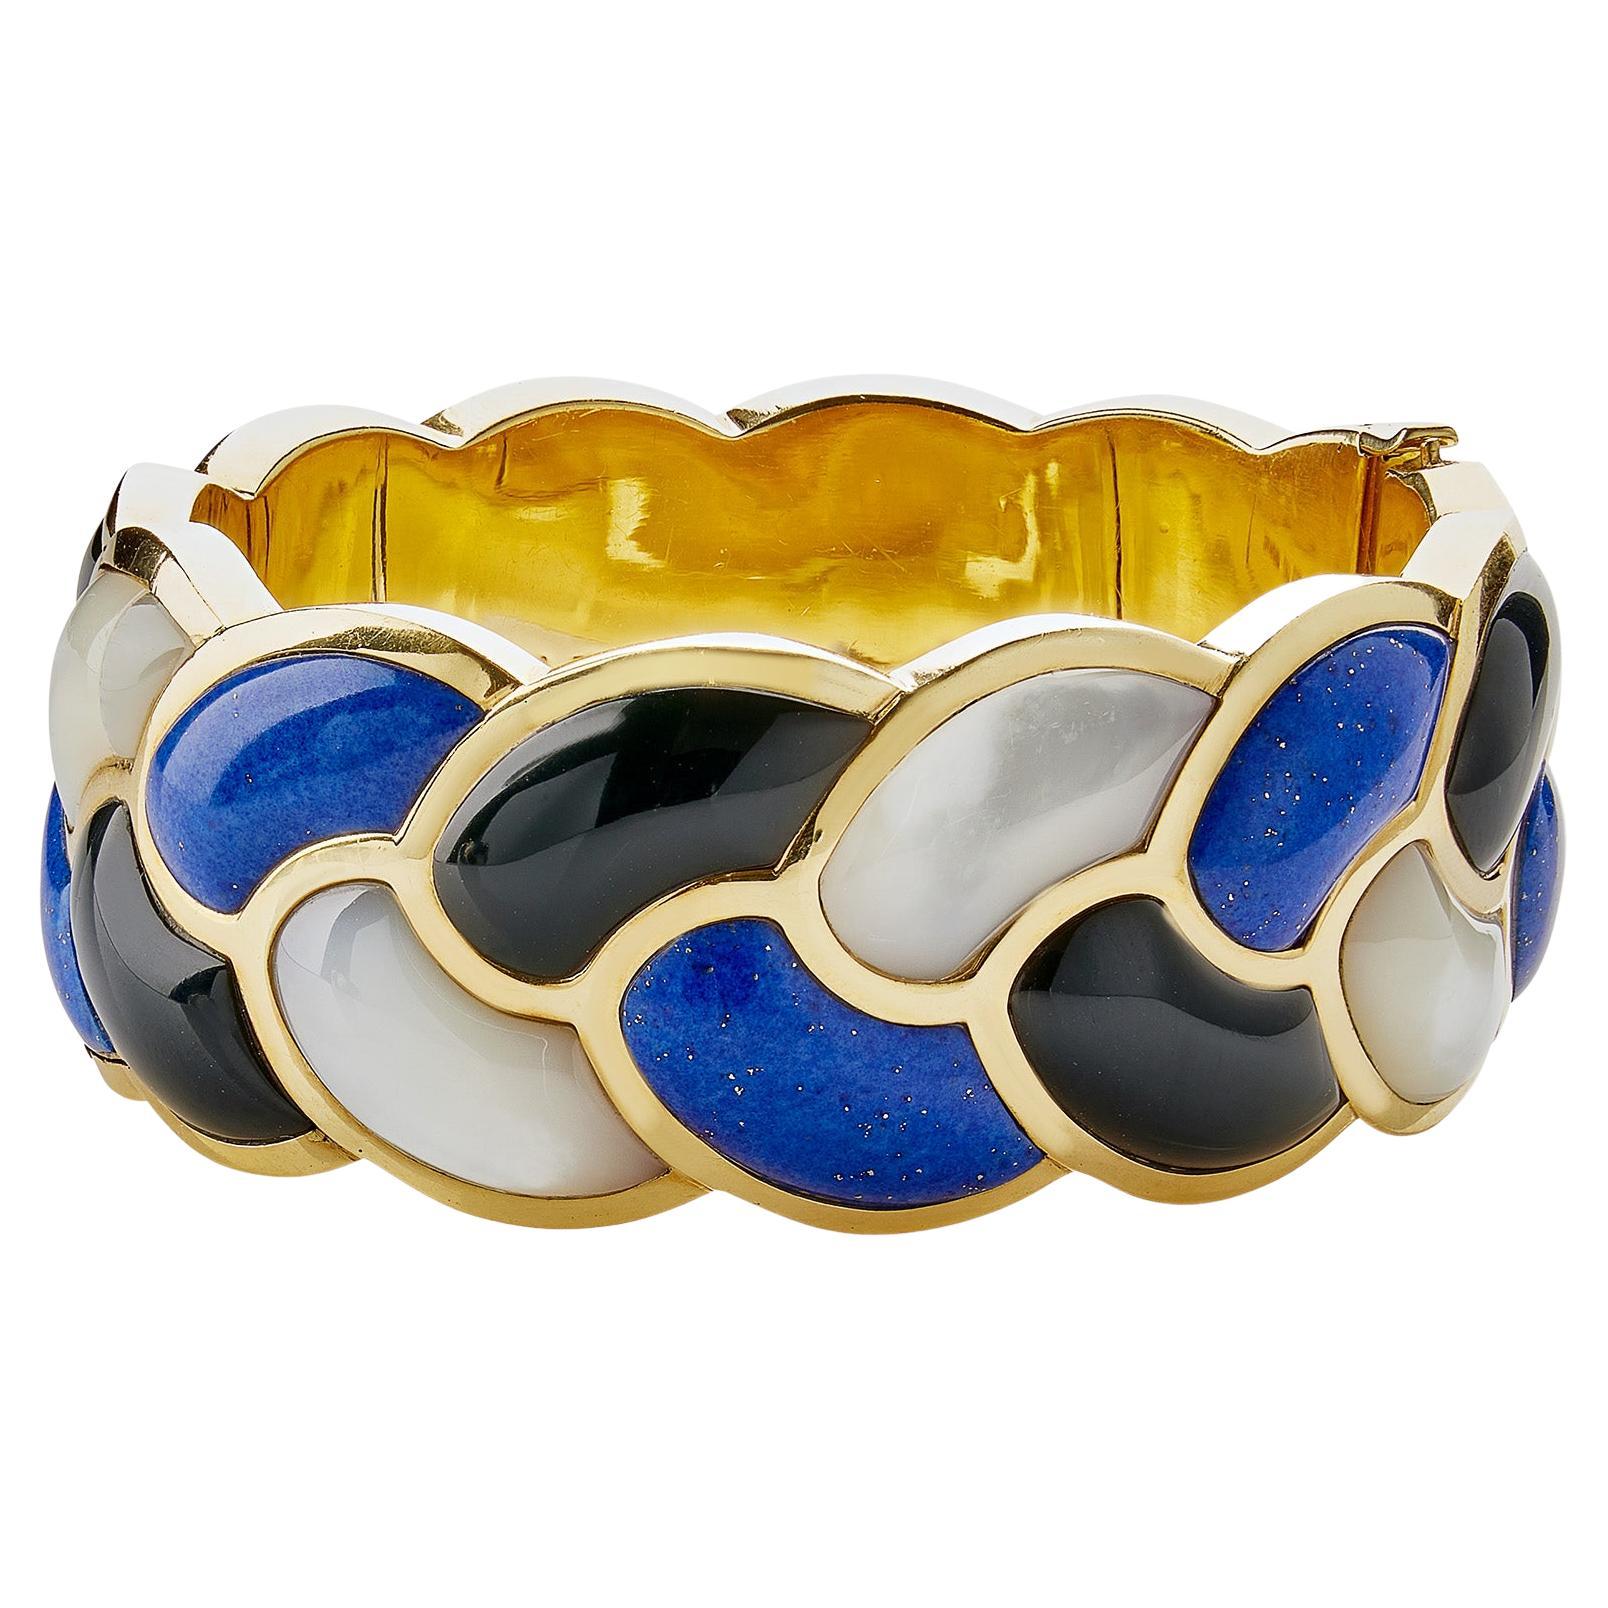 Tiffany & Co. Lapis, Black Jade and Mother-of-Pearl "Rope" Bangle Bracelet